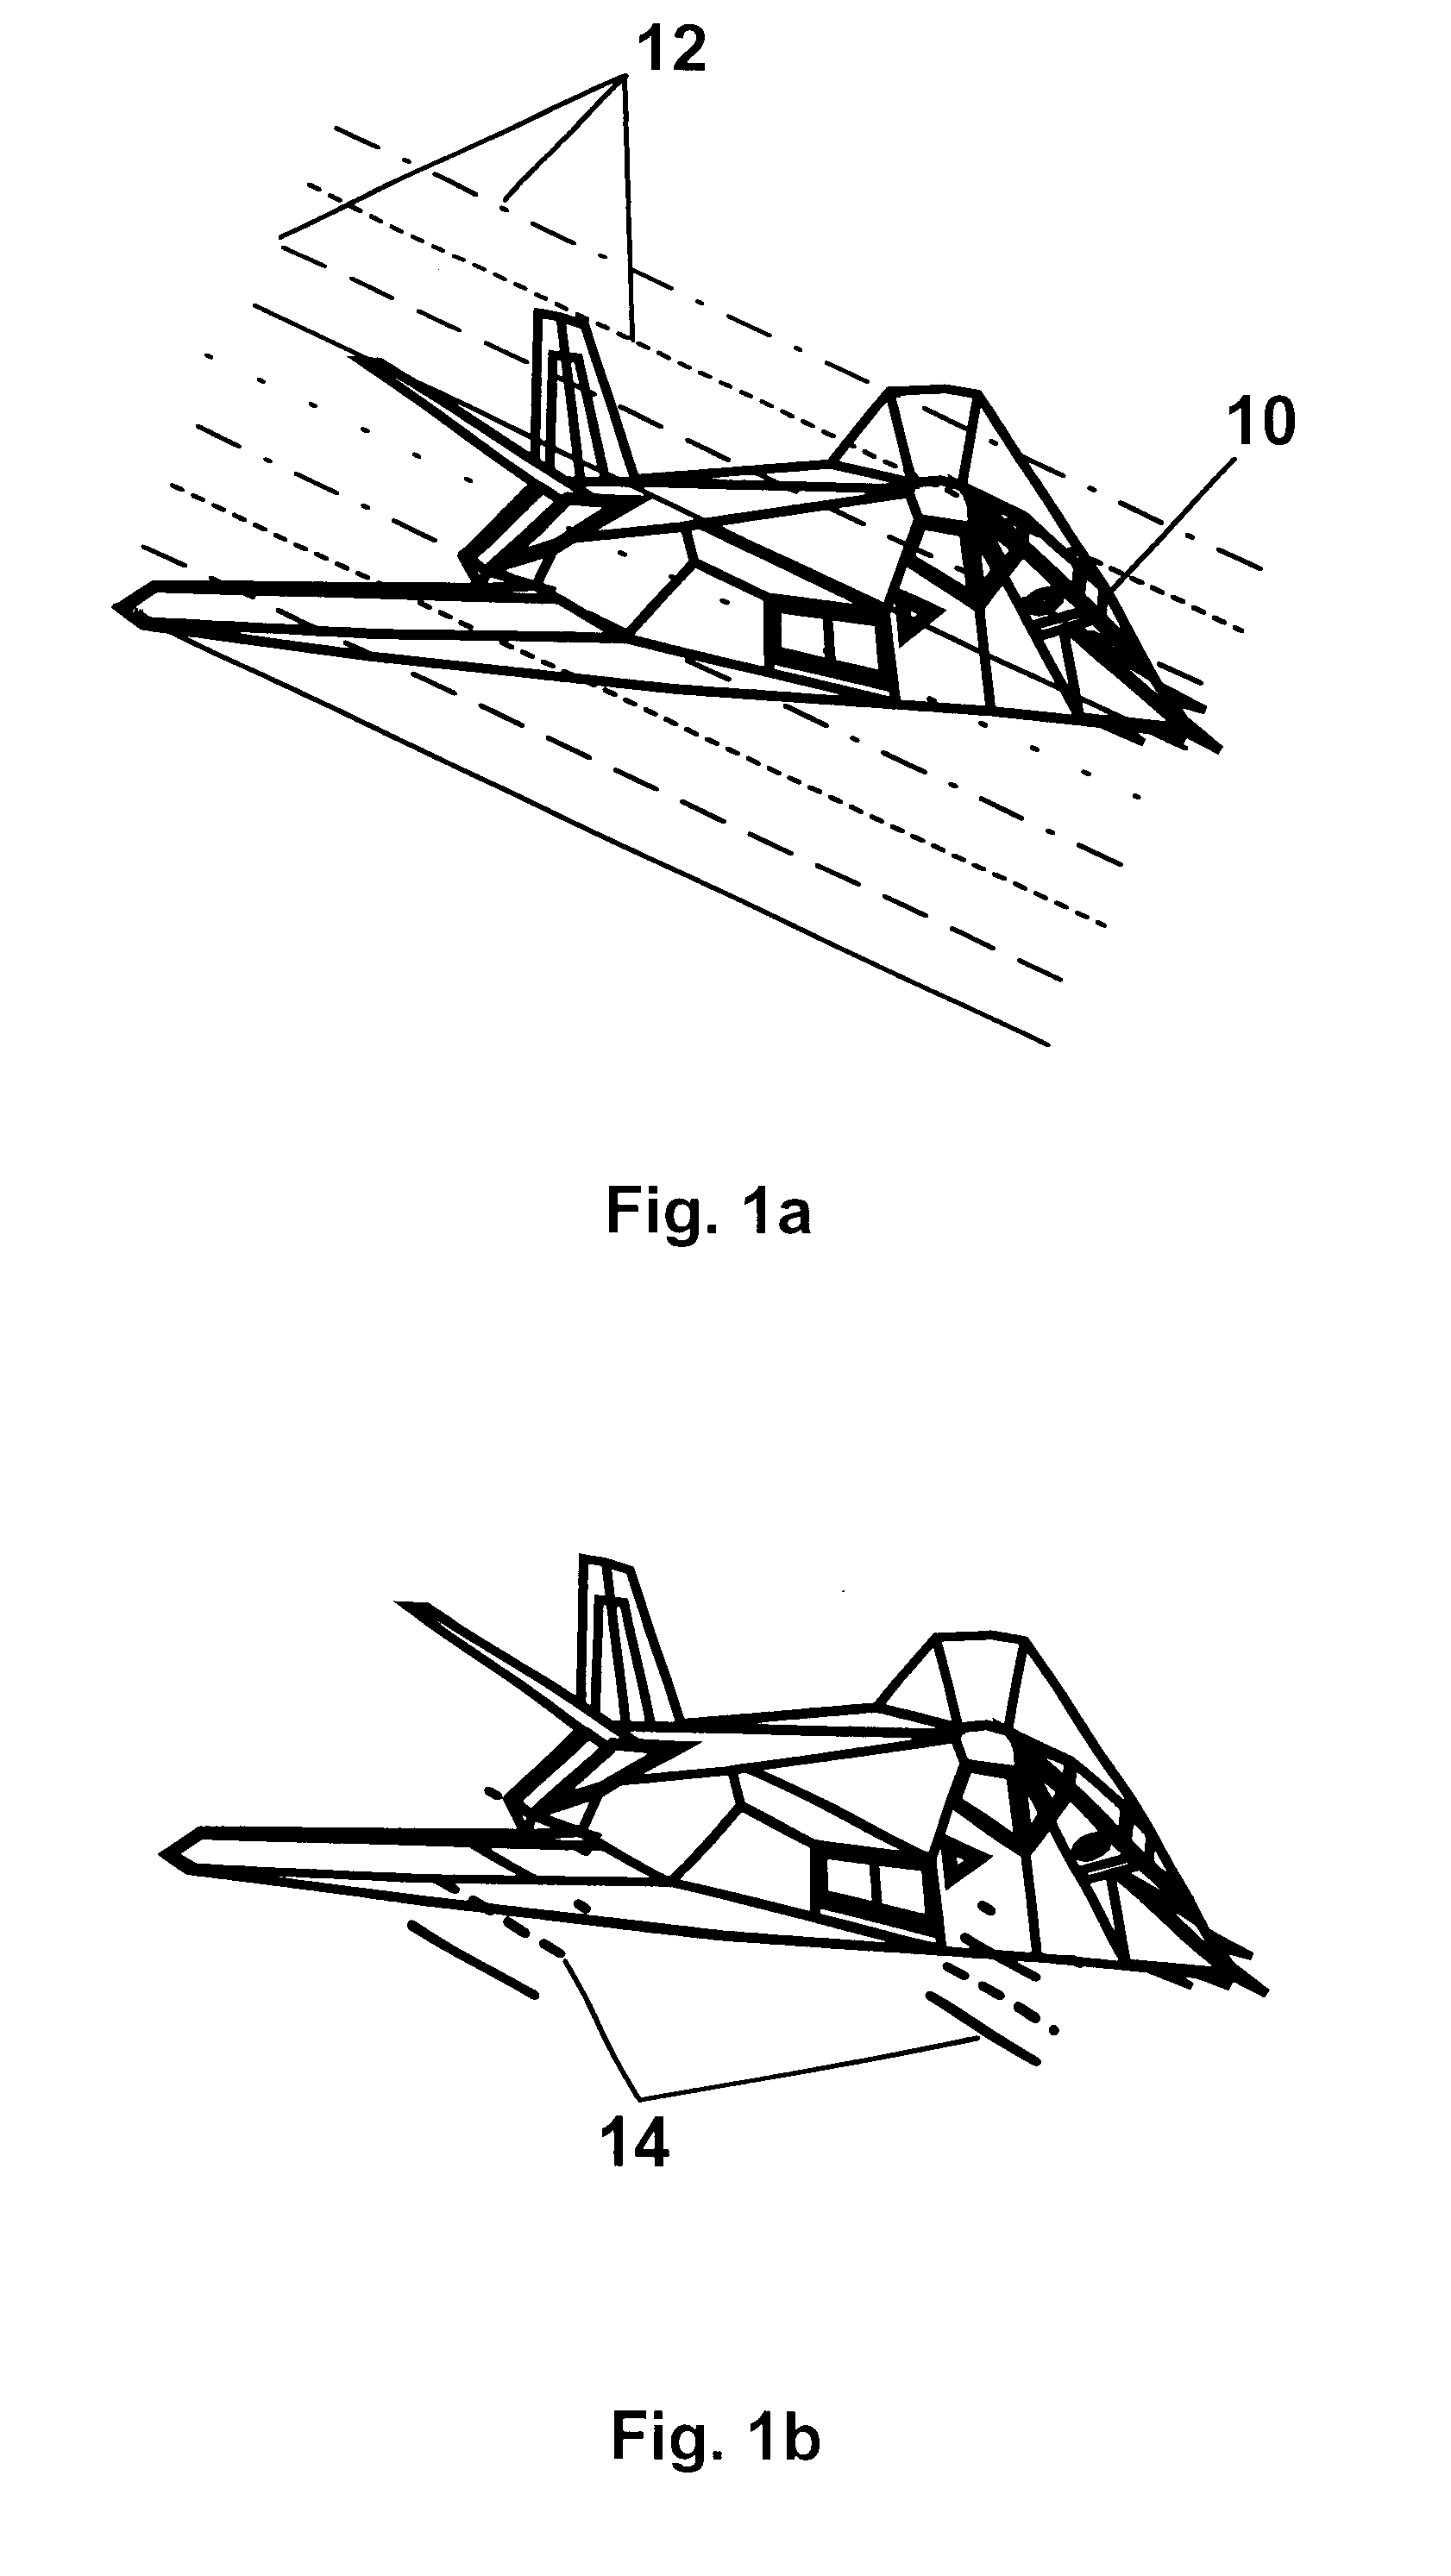 Method for creation of planar or complex wavefronts in close proximity to a transmitter array